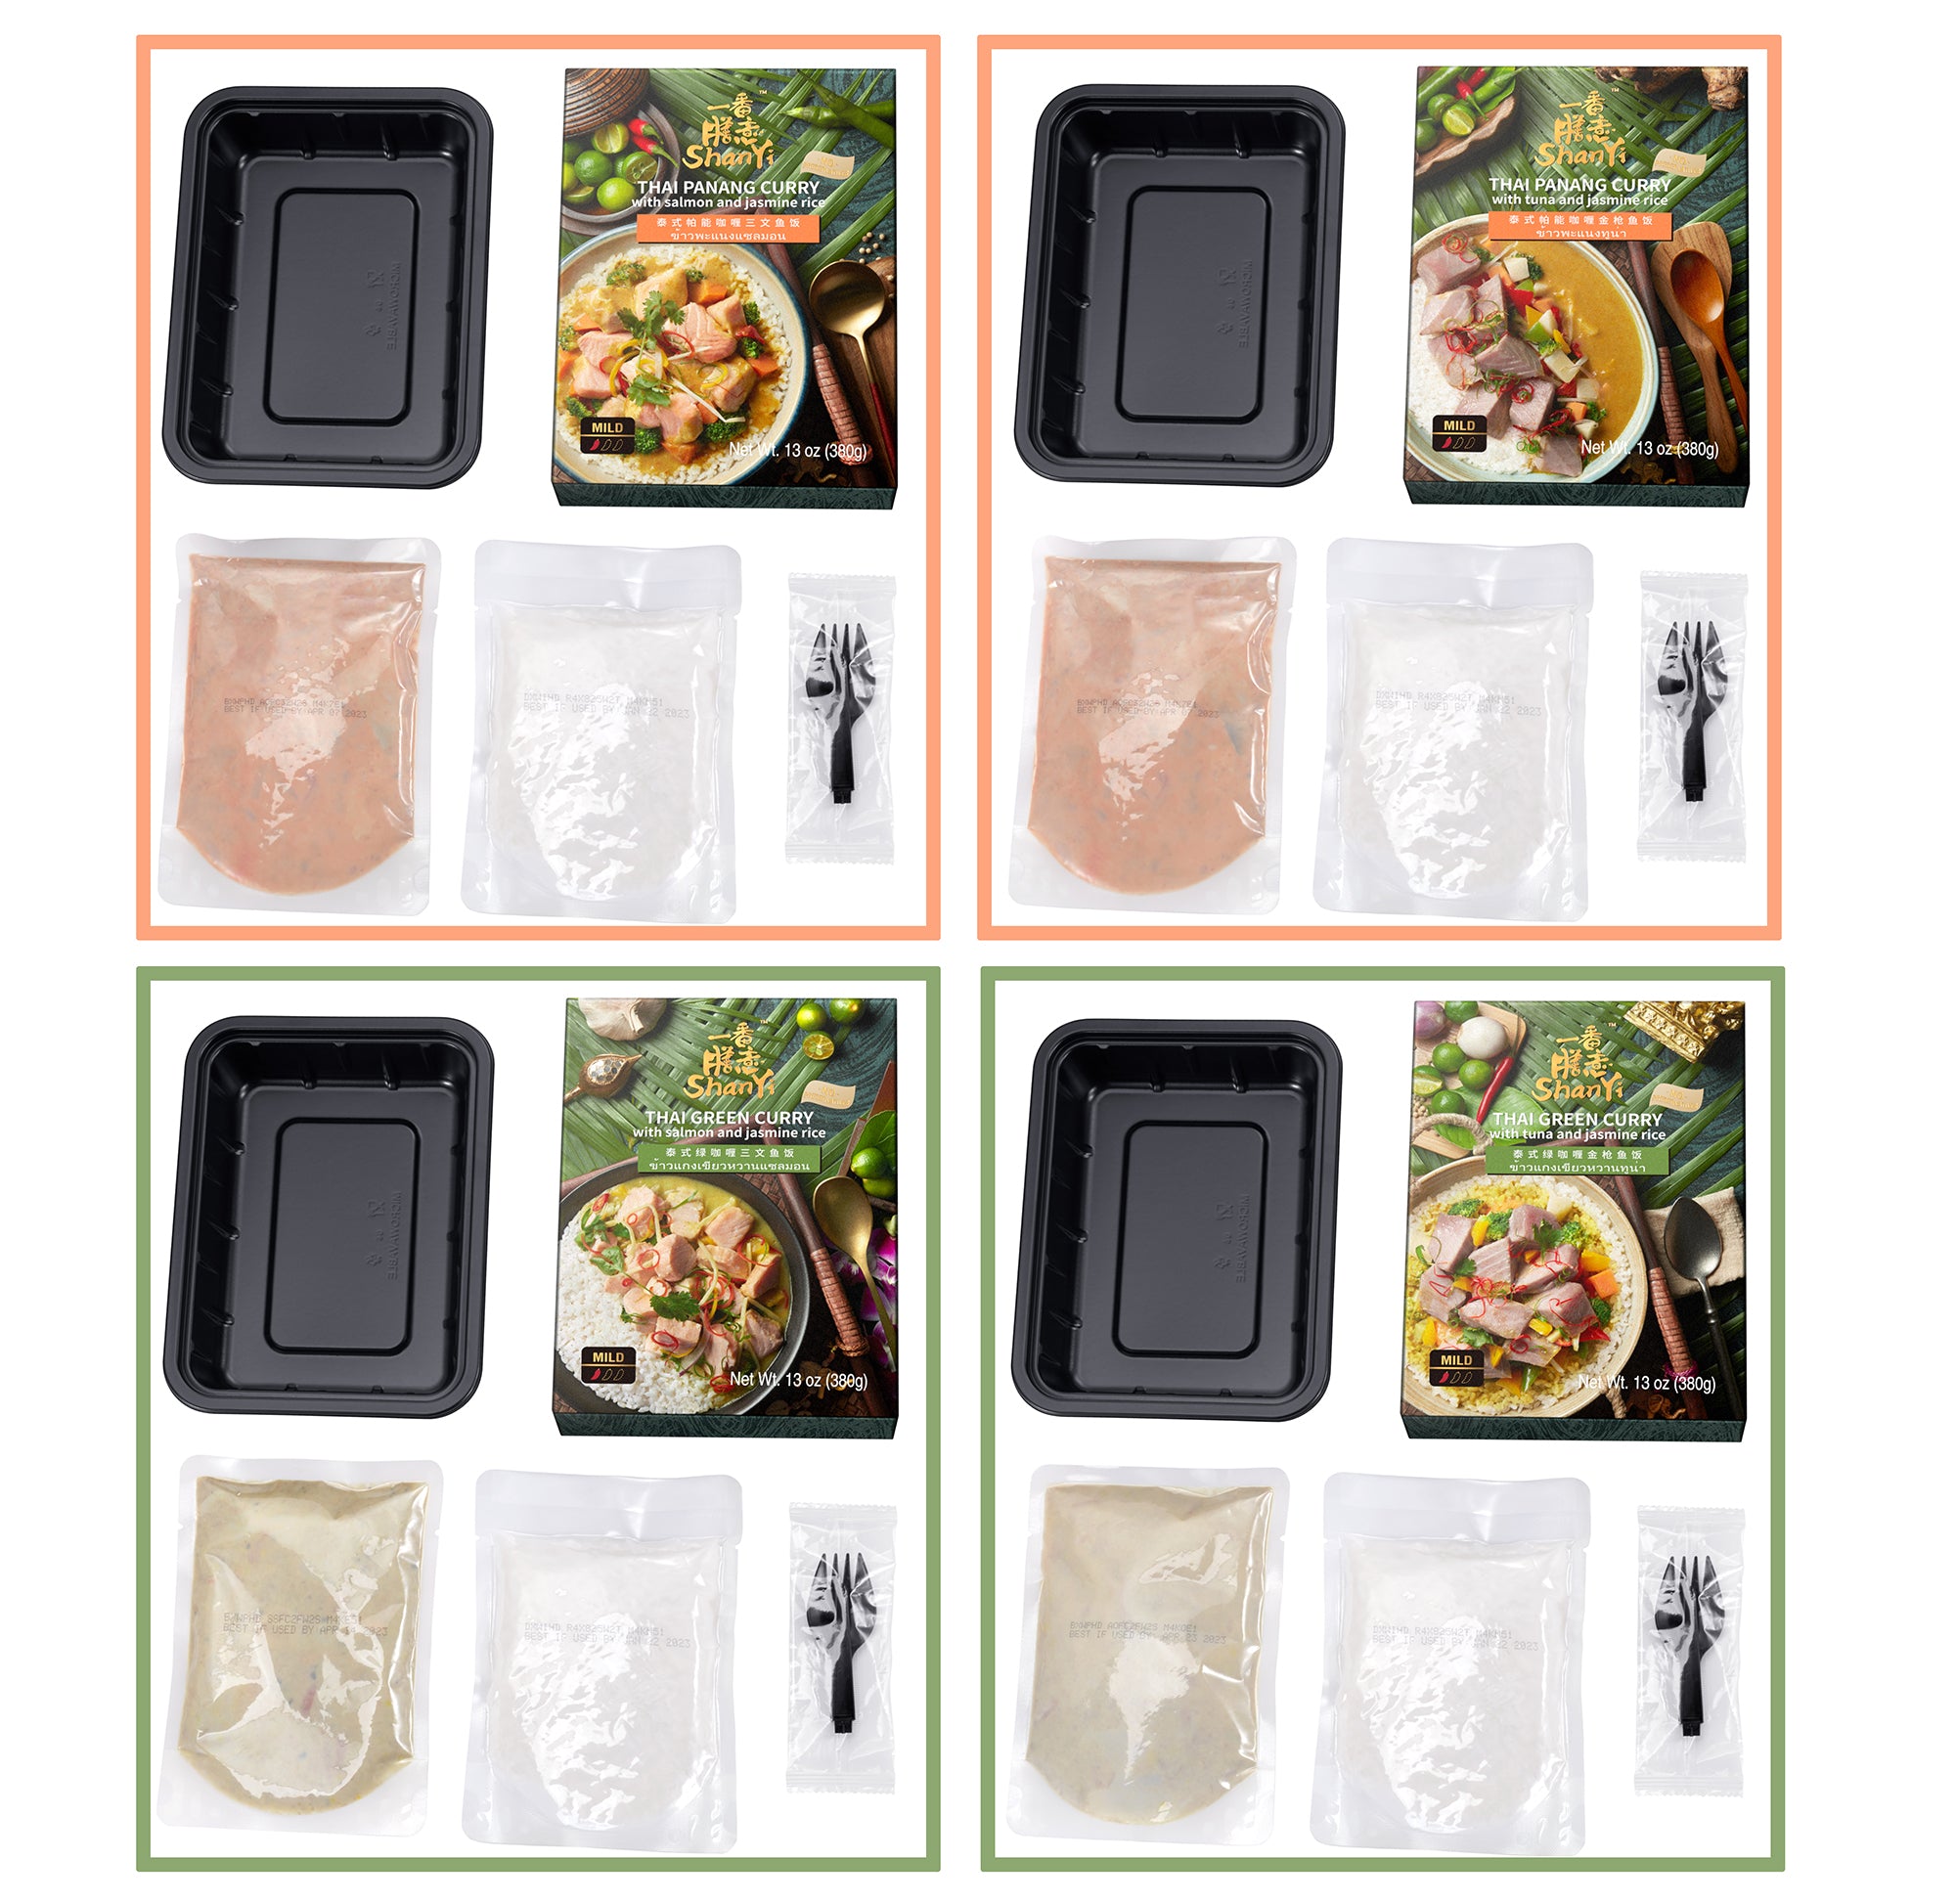 ShanYi Instant Microwave Meals Ready to Eat, 380g/13oz, Thai Panang/Green Curry with Salmon/Tuna and Jasmine Rice, Prepared Foods, 4-in-1 Mixed flavors, 4 Pack